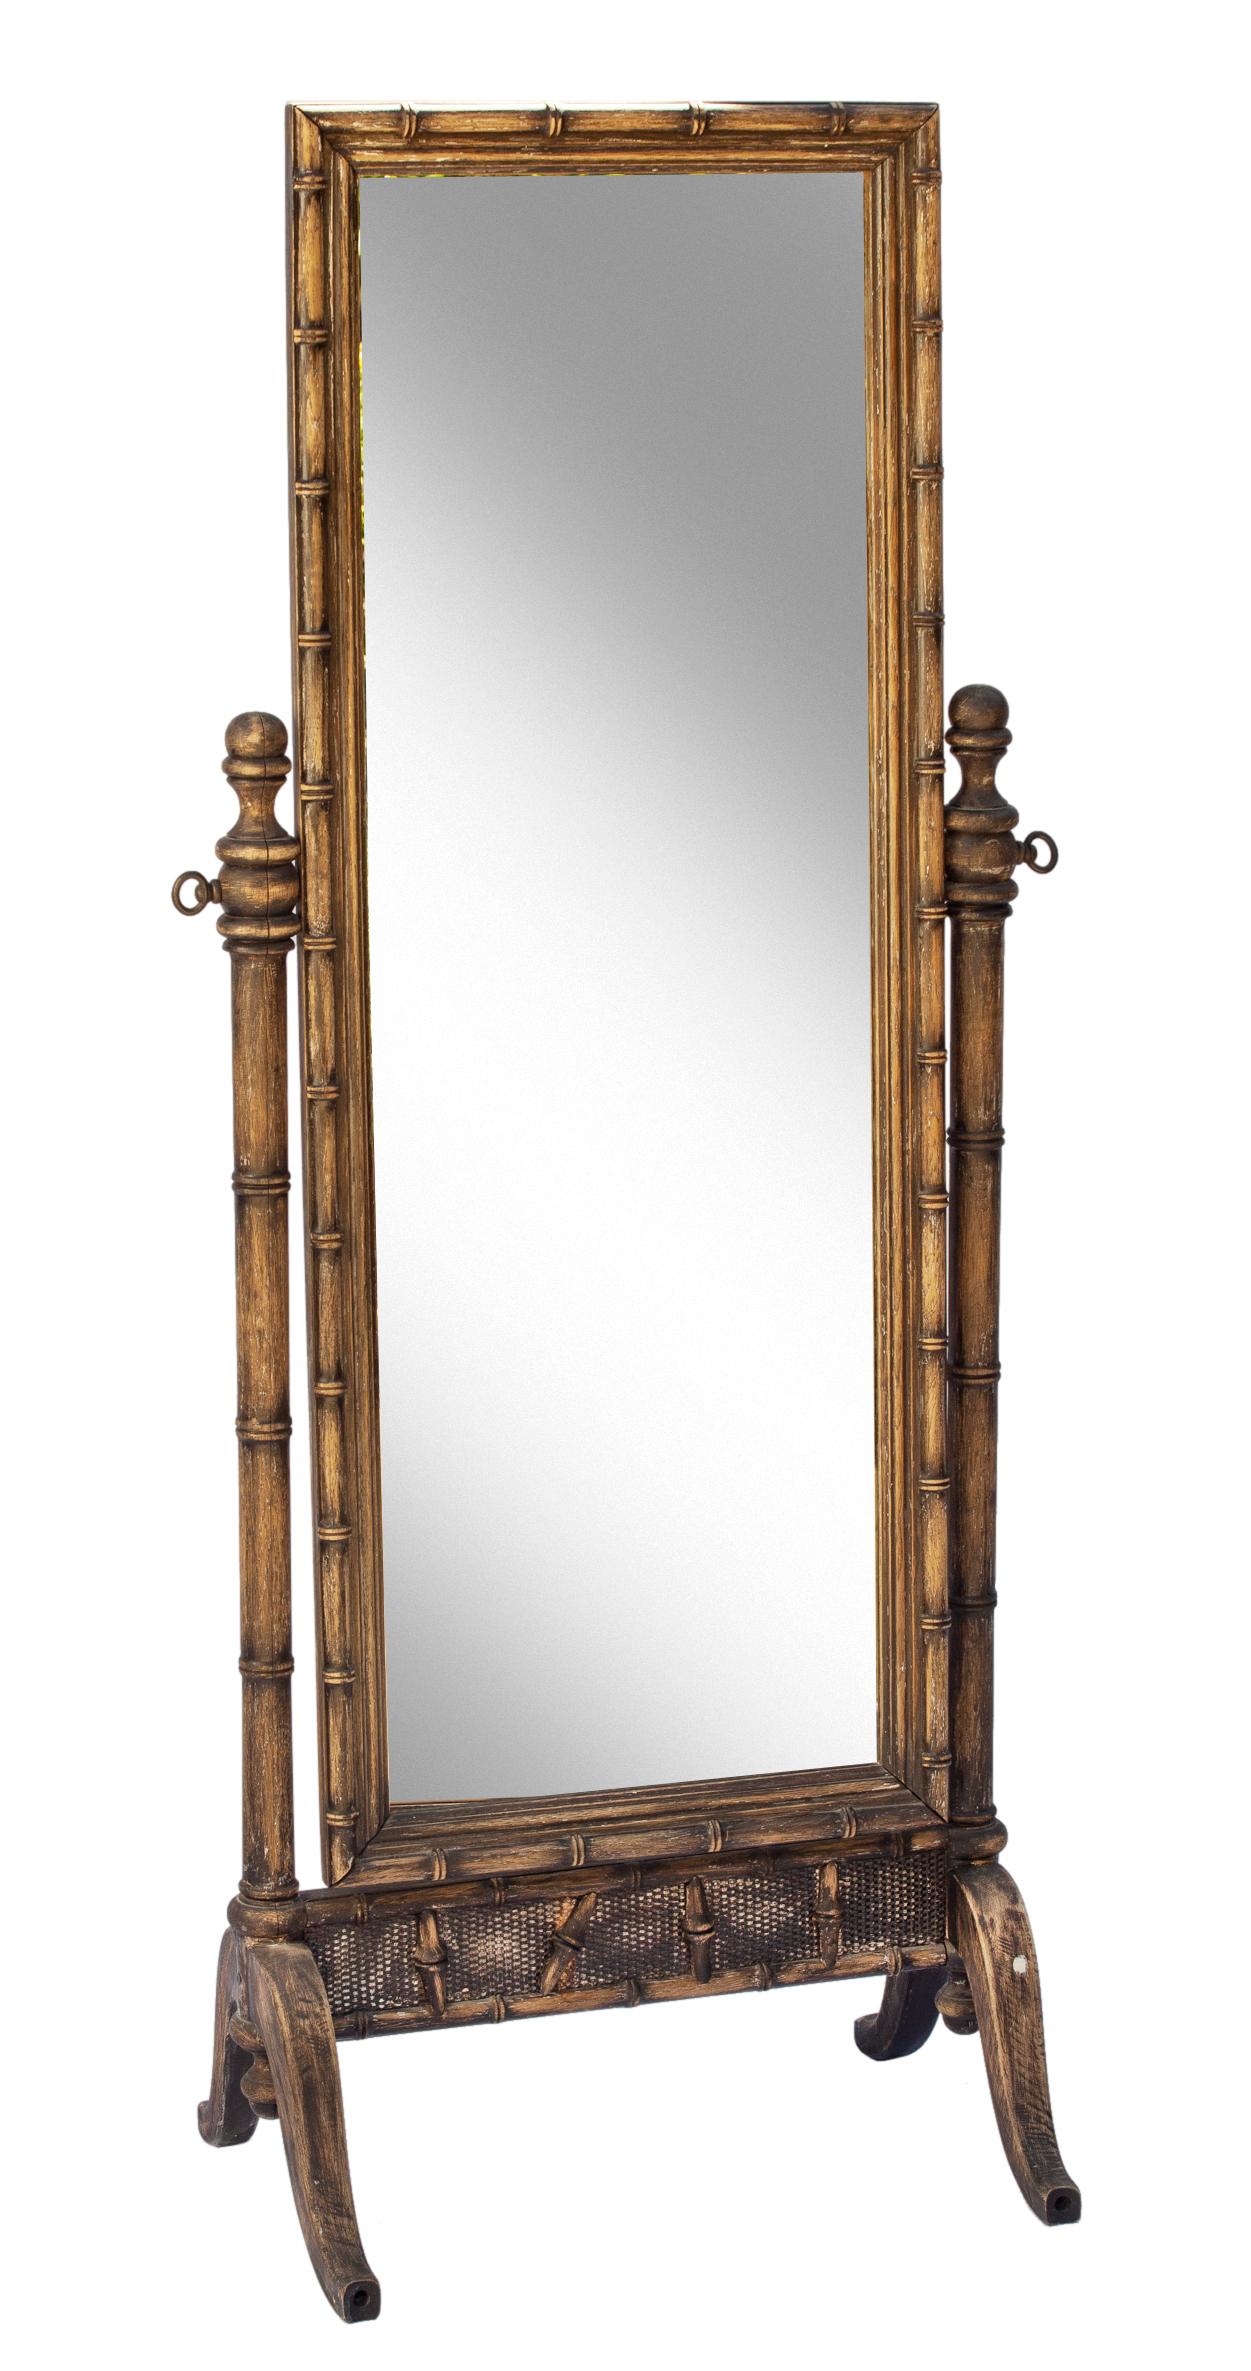 Henry Link faux bamboo cheval mirror. 
Vintage stripped hardwood Henry Link faux bamboo mirror in an elongated rectangular frame bordering the cheval mirror on a very sturdy stand with full hardwood backing. The full length mirror has adjustable